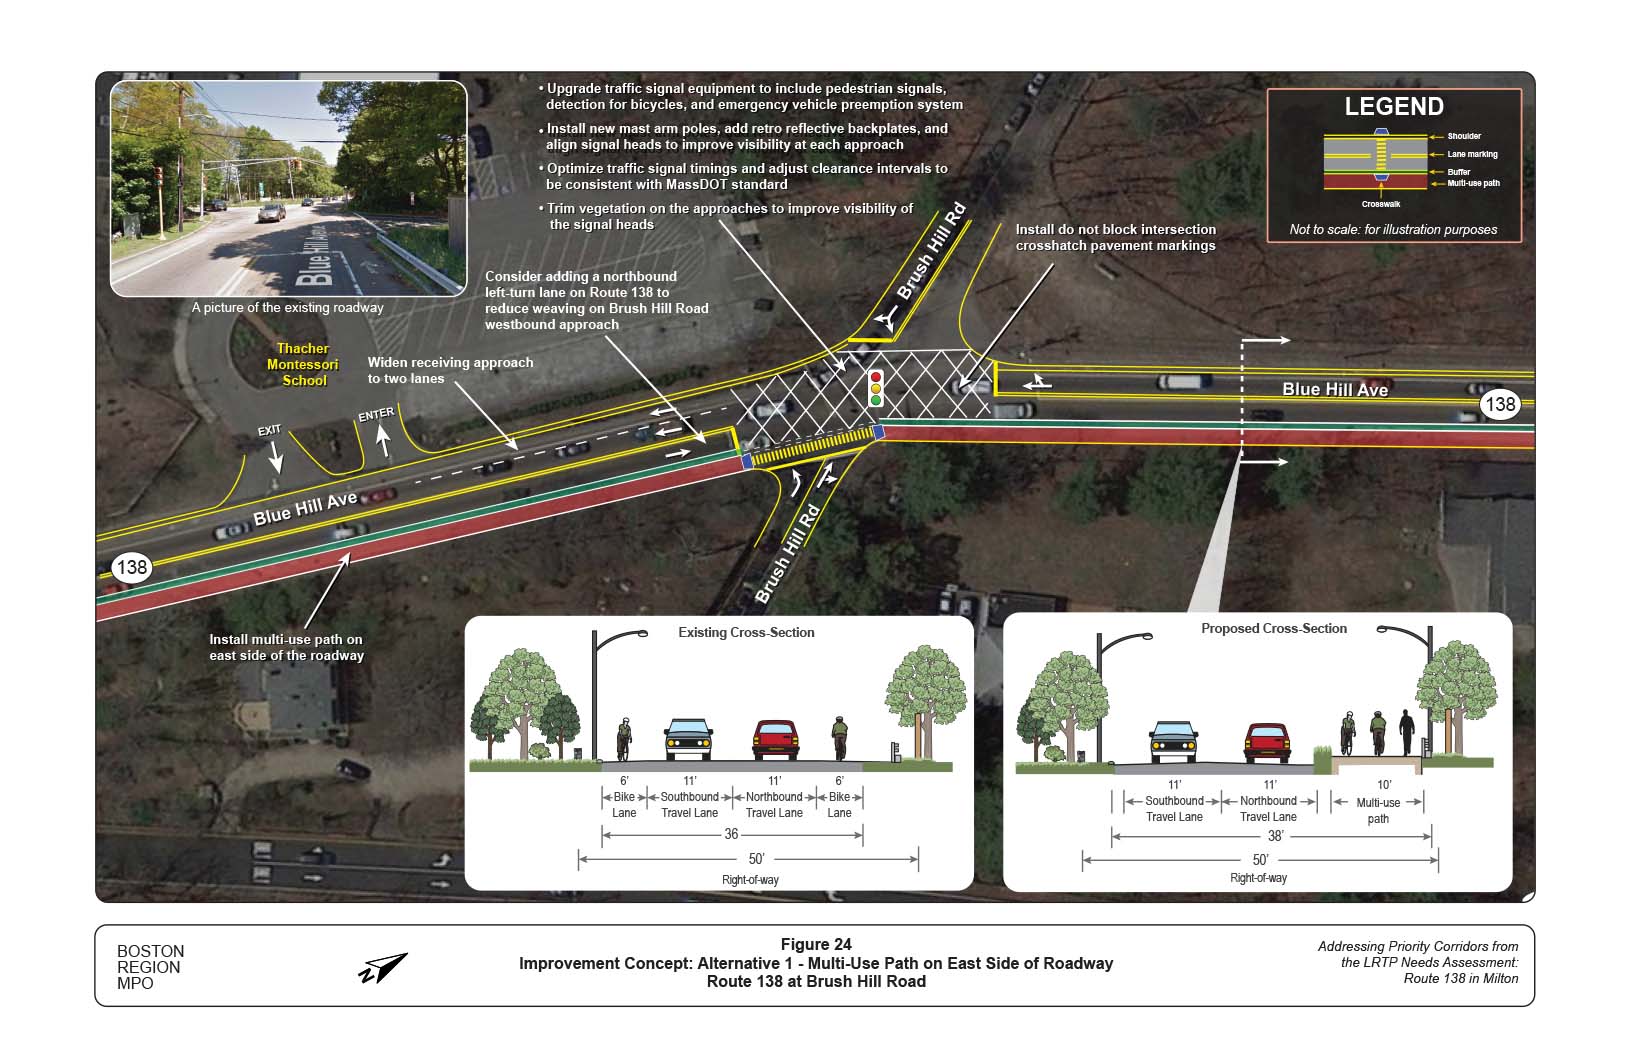 Figure 24 is an aerial photo of Route 138 at Brush Hill Road showing Alternative 1, a multi-use path on the east side of the roadway, and overlays showing the existing and proposed cross-sections..